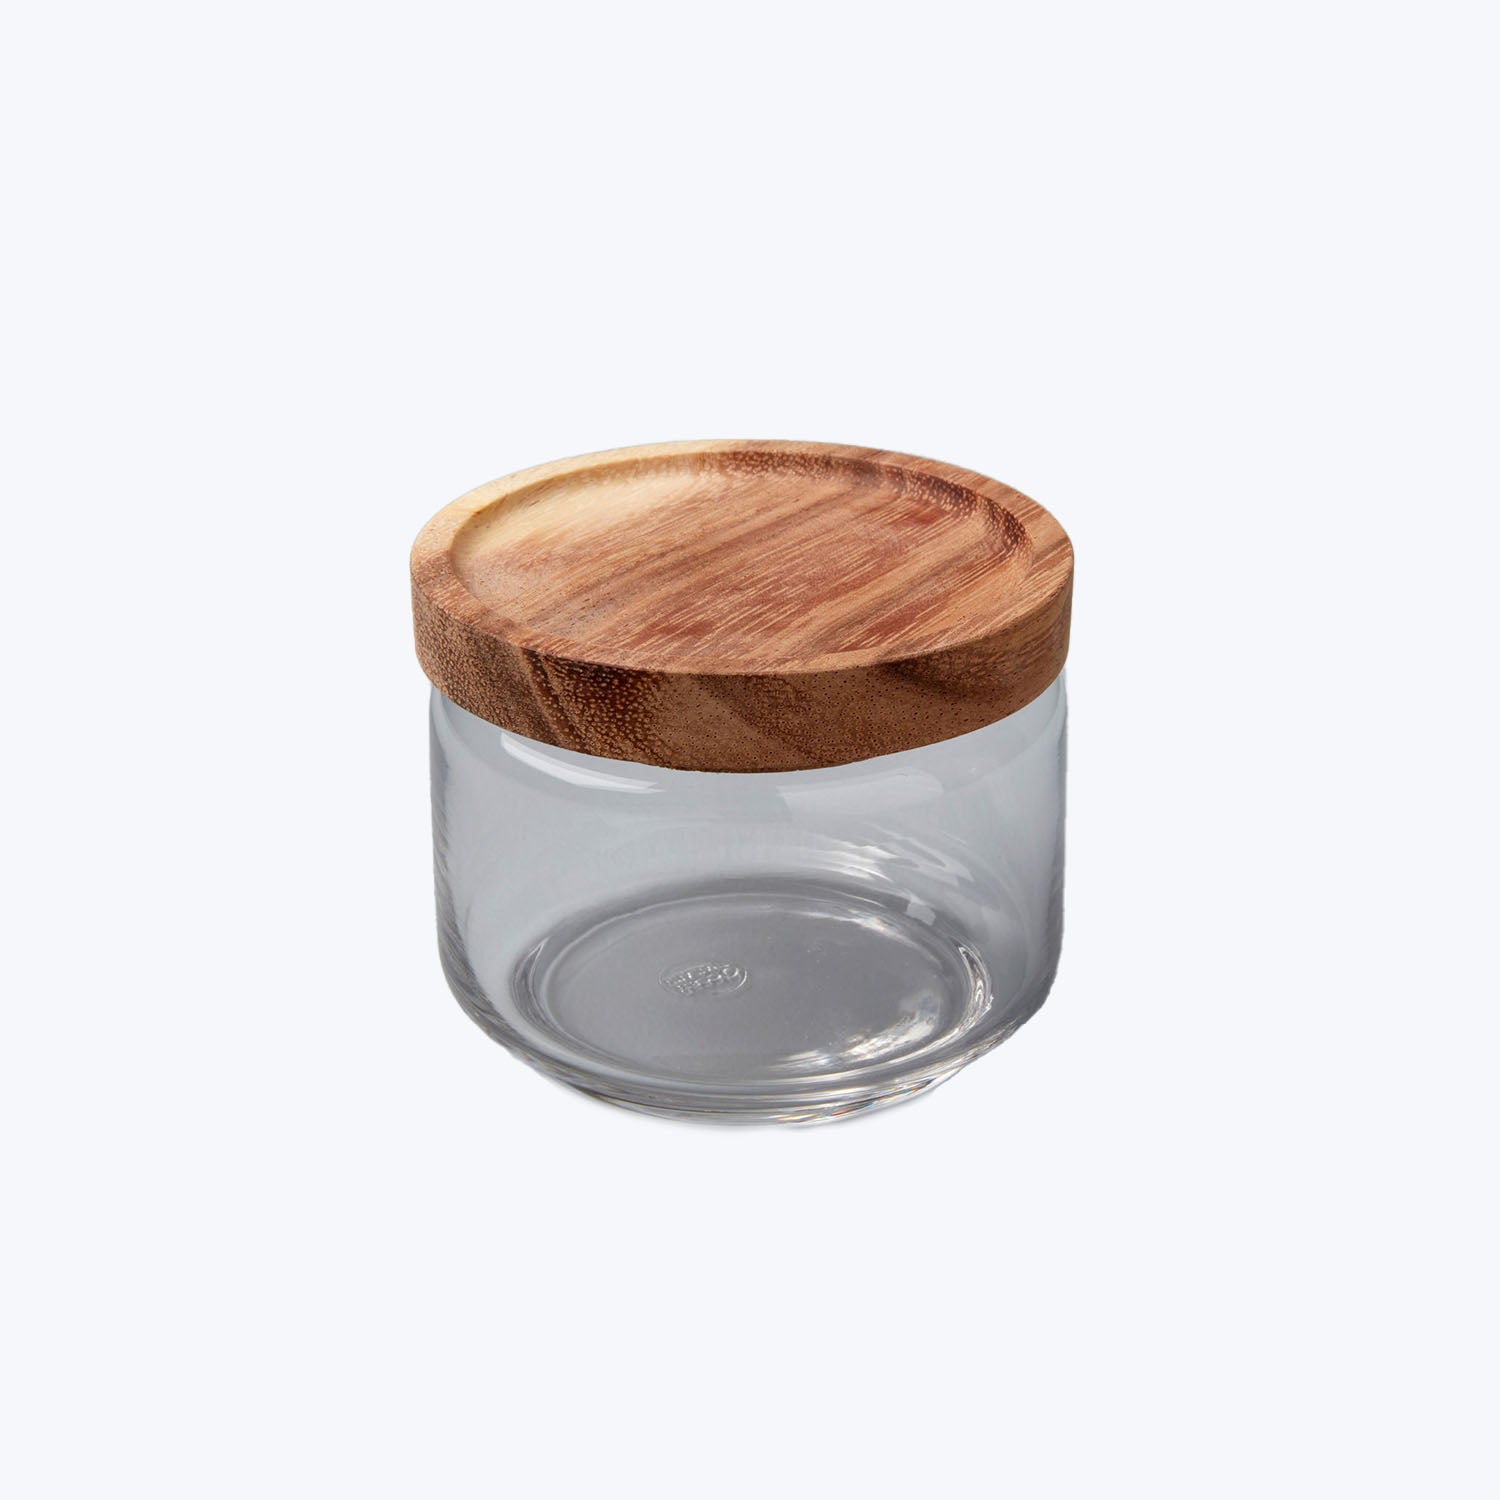 Acacia & Glass Storage Containers